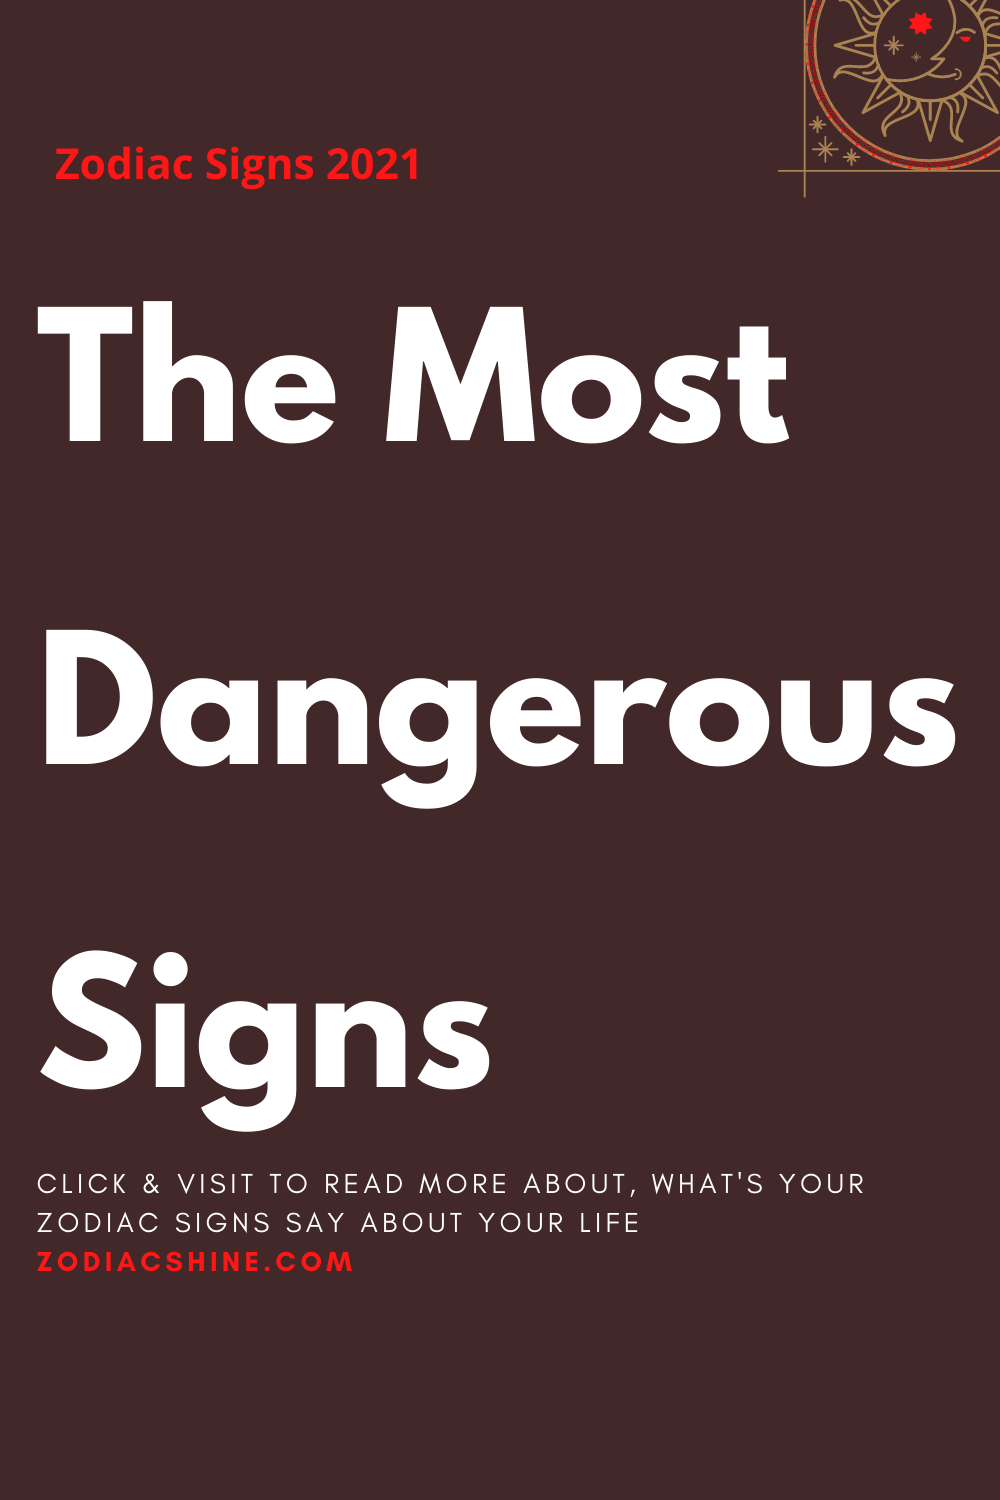 The Most Dangerous Signs